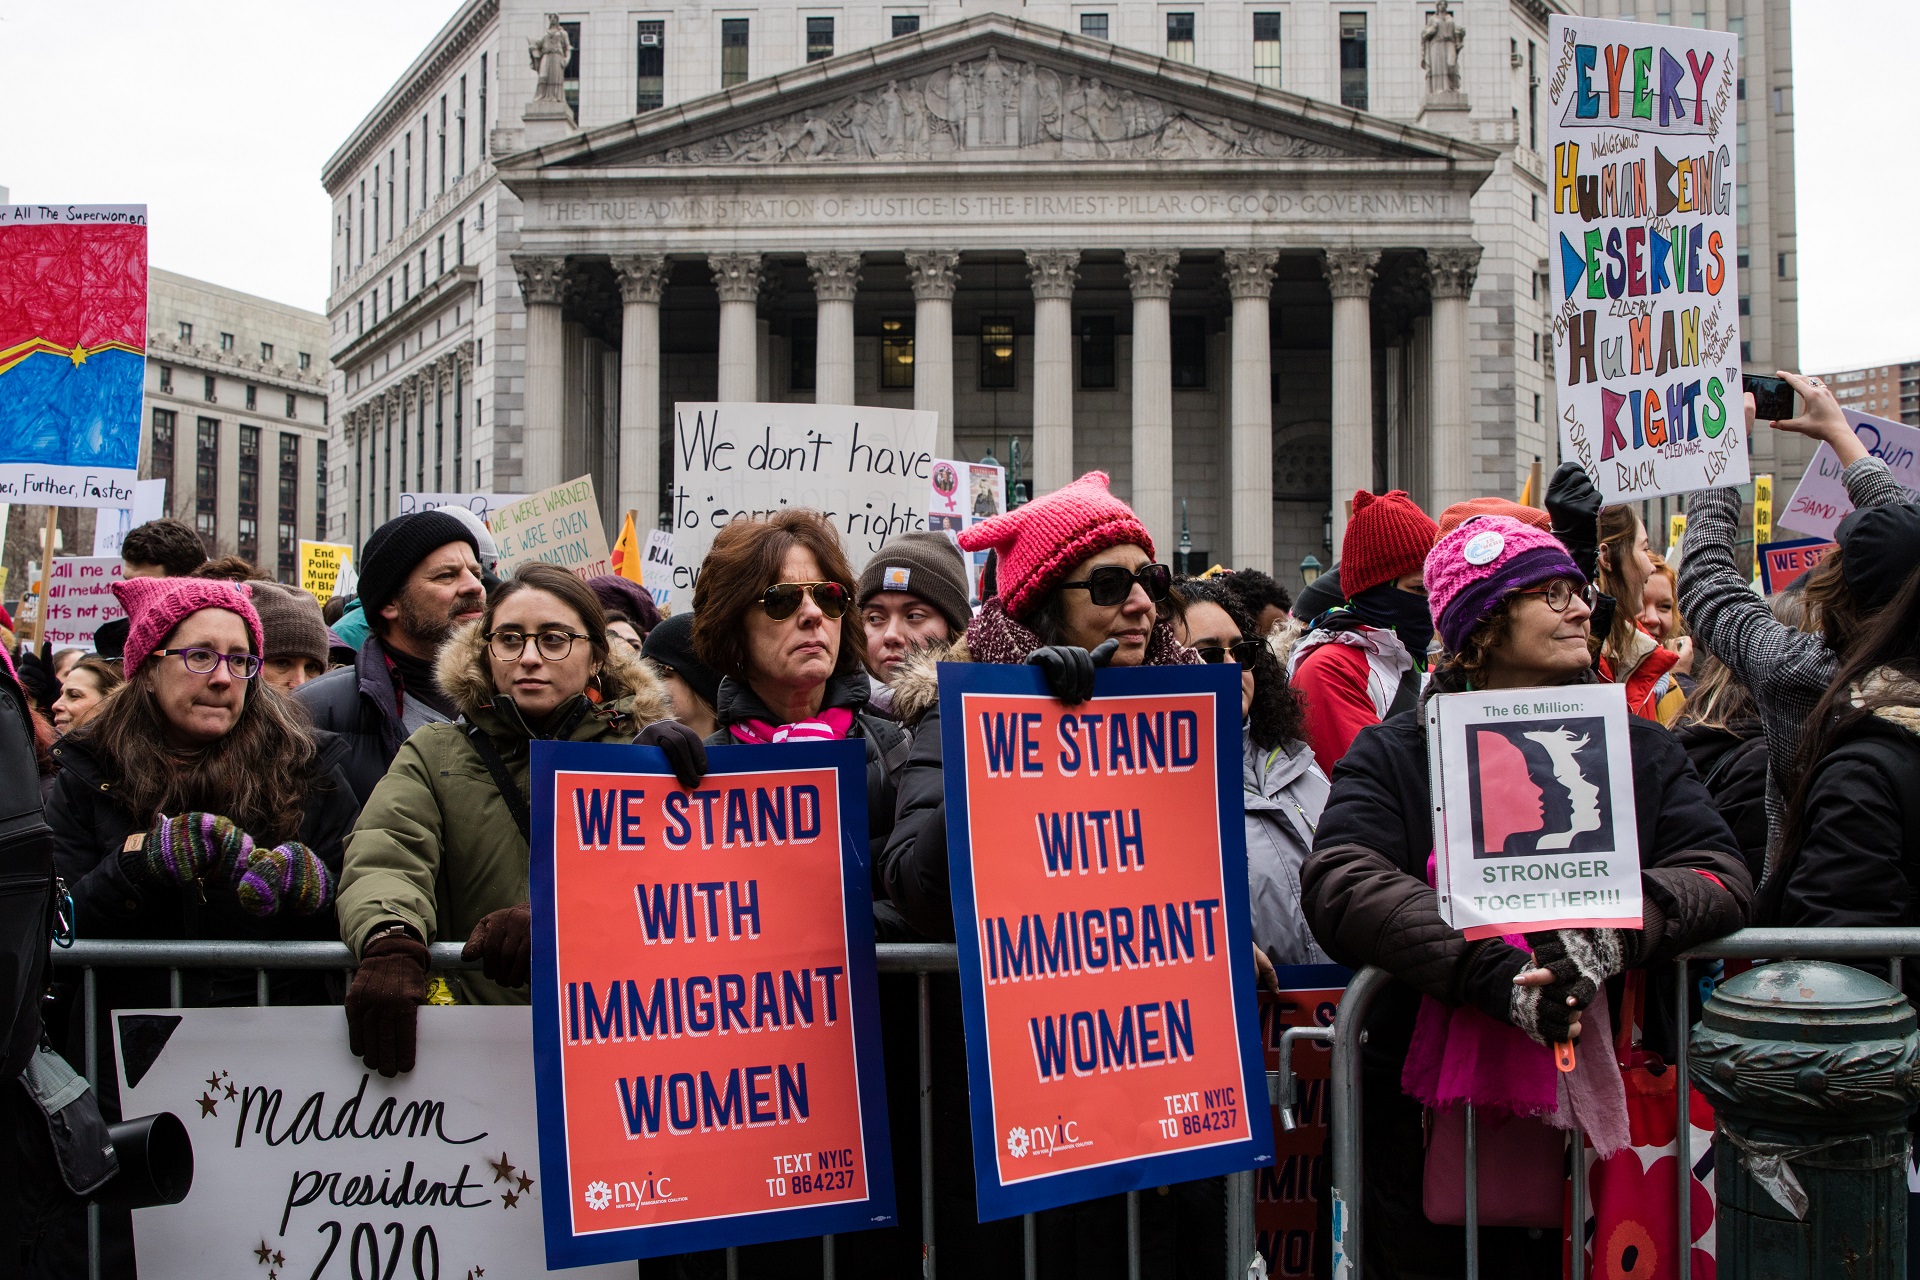 Hundreds of women gathered in Foley Square to protest the Trump administration and stand up for gender and minority rights. Eagle photos by Paul Frangipane